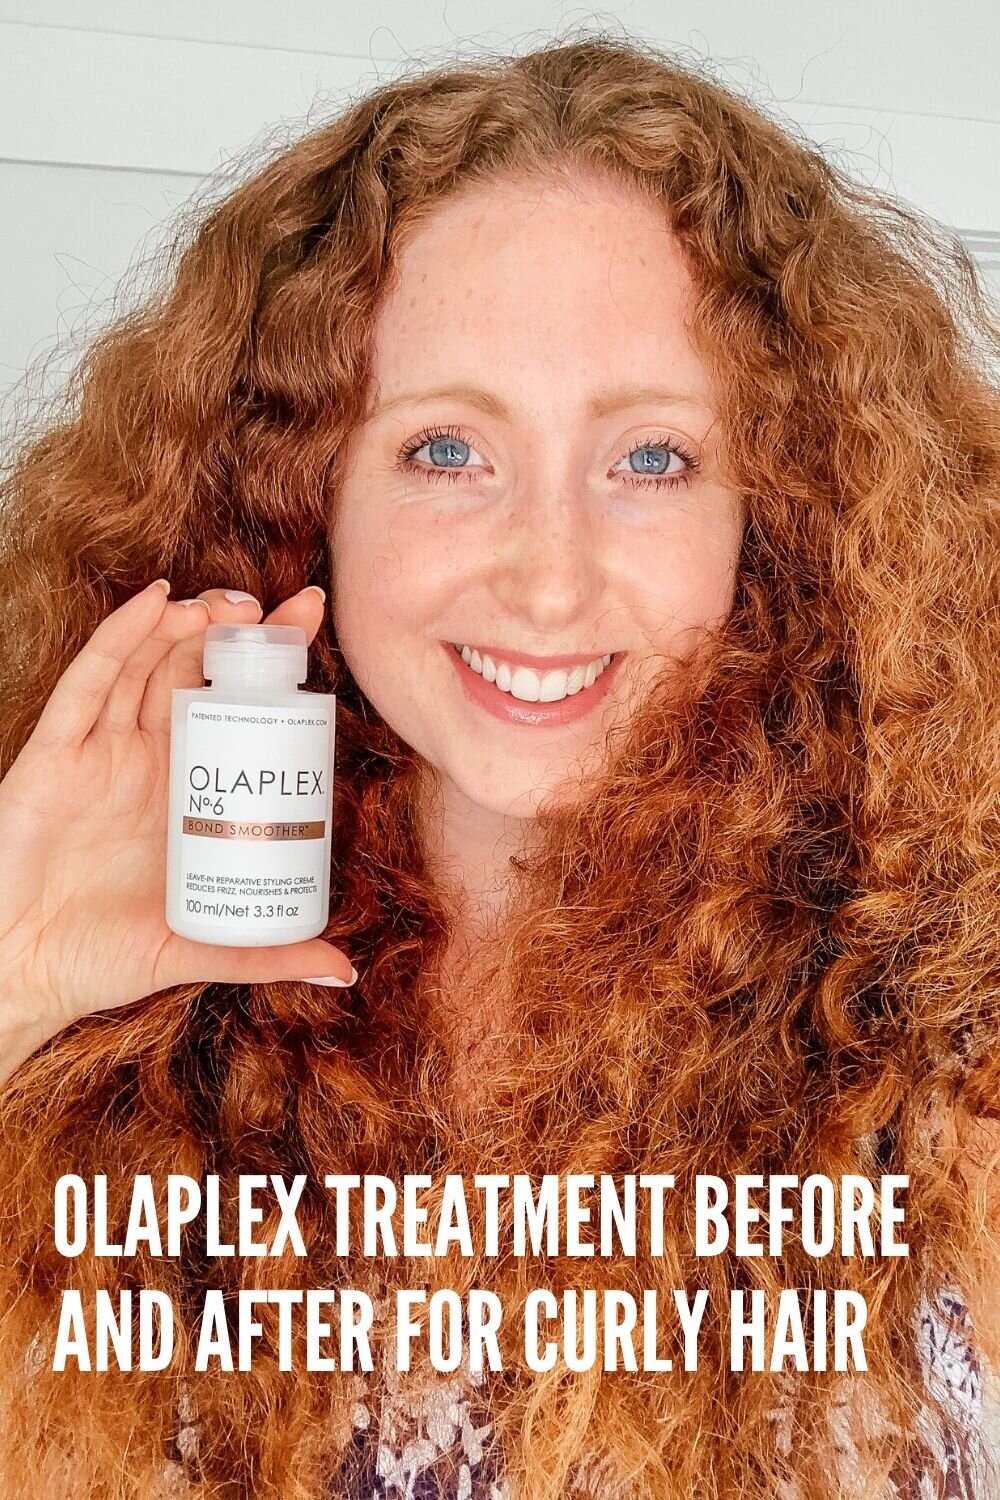 In this Olaplex blog post, I am going to tell you about Olaplex 3, Olaplex 6 and give you all the details on Olaplex 3 vs 6. There are so many Olaplex products that it can be confusing to know the best olaplex for damaged hair or which Olaplex is the